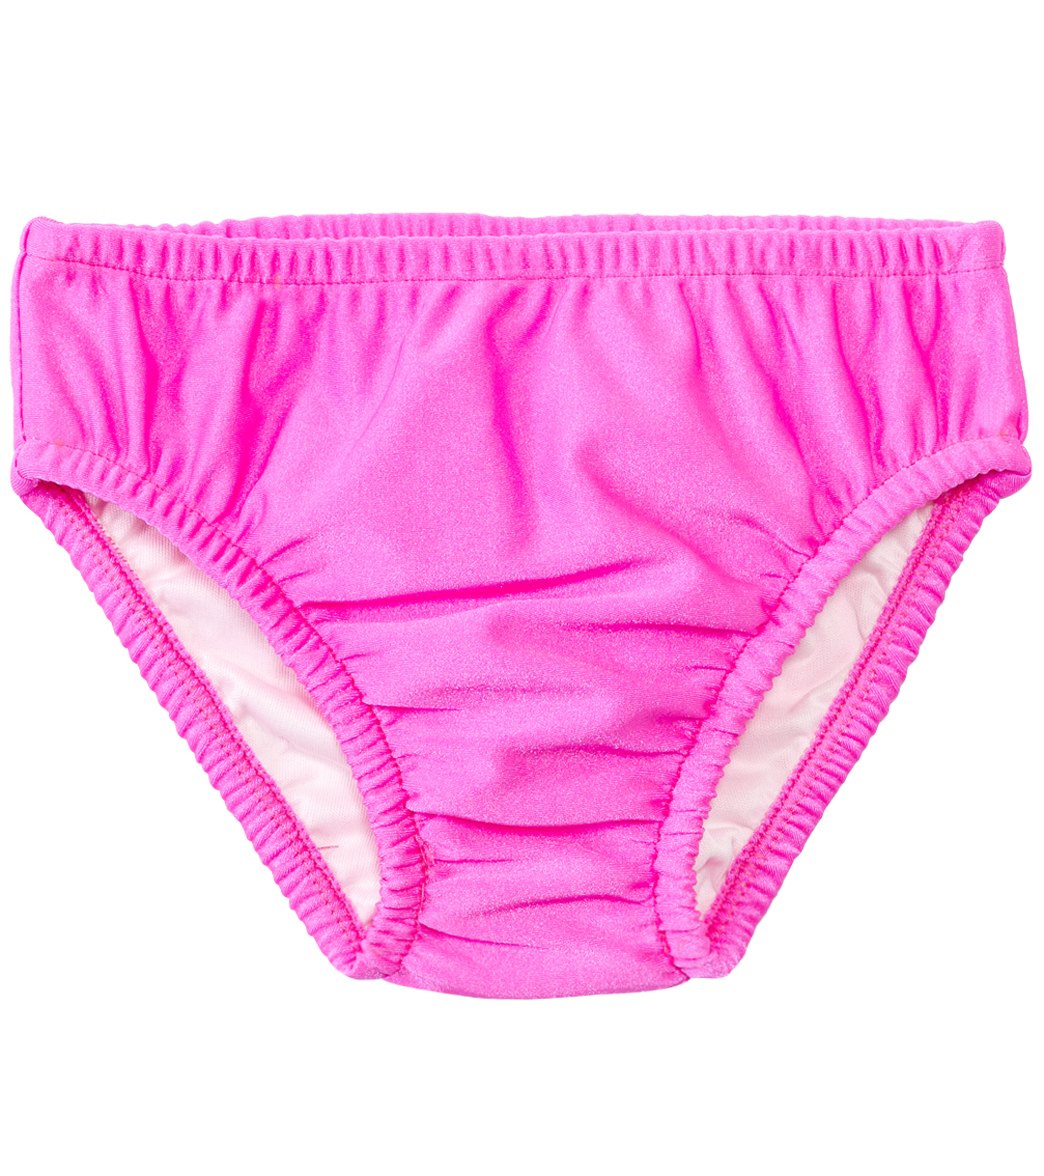 My Pool Pal Swimster - Pink 18 Months Nylon/Polyester/Spandex - Swimoutlet.com